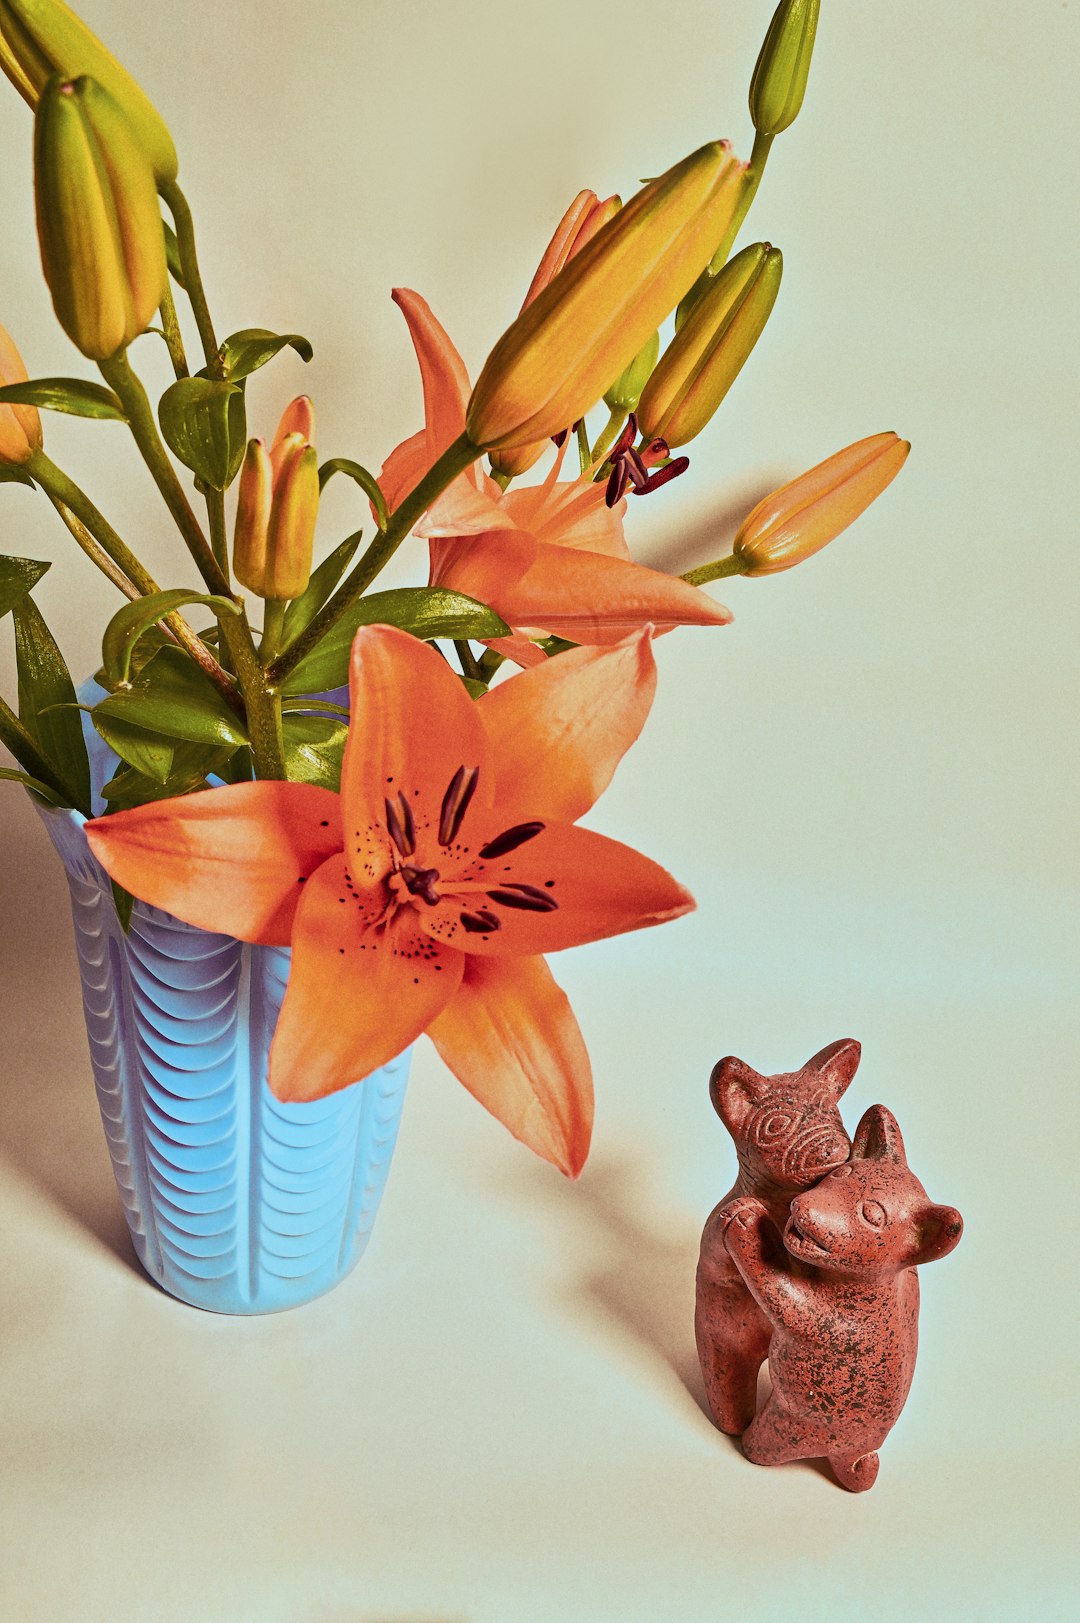 orange and yellow flower in blue and white ceramic vase